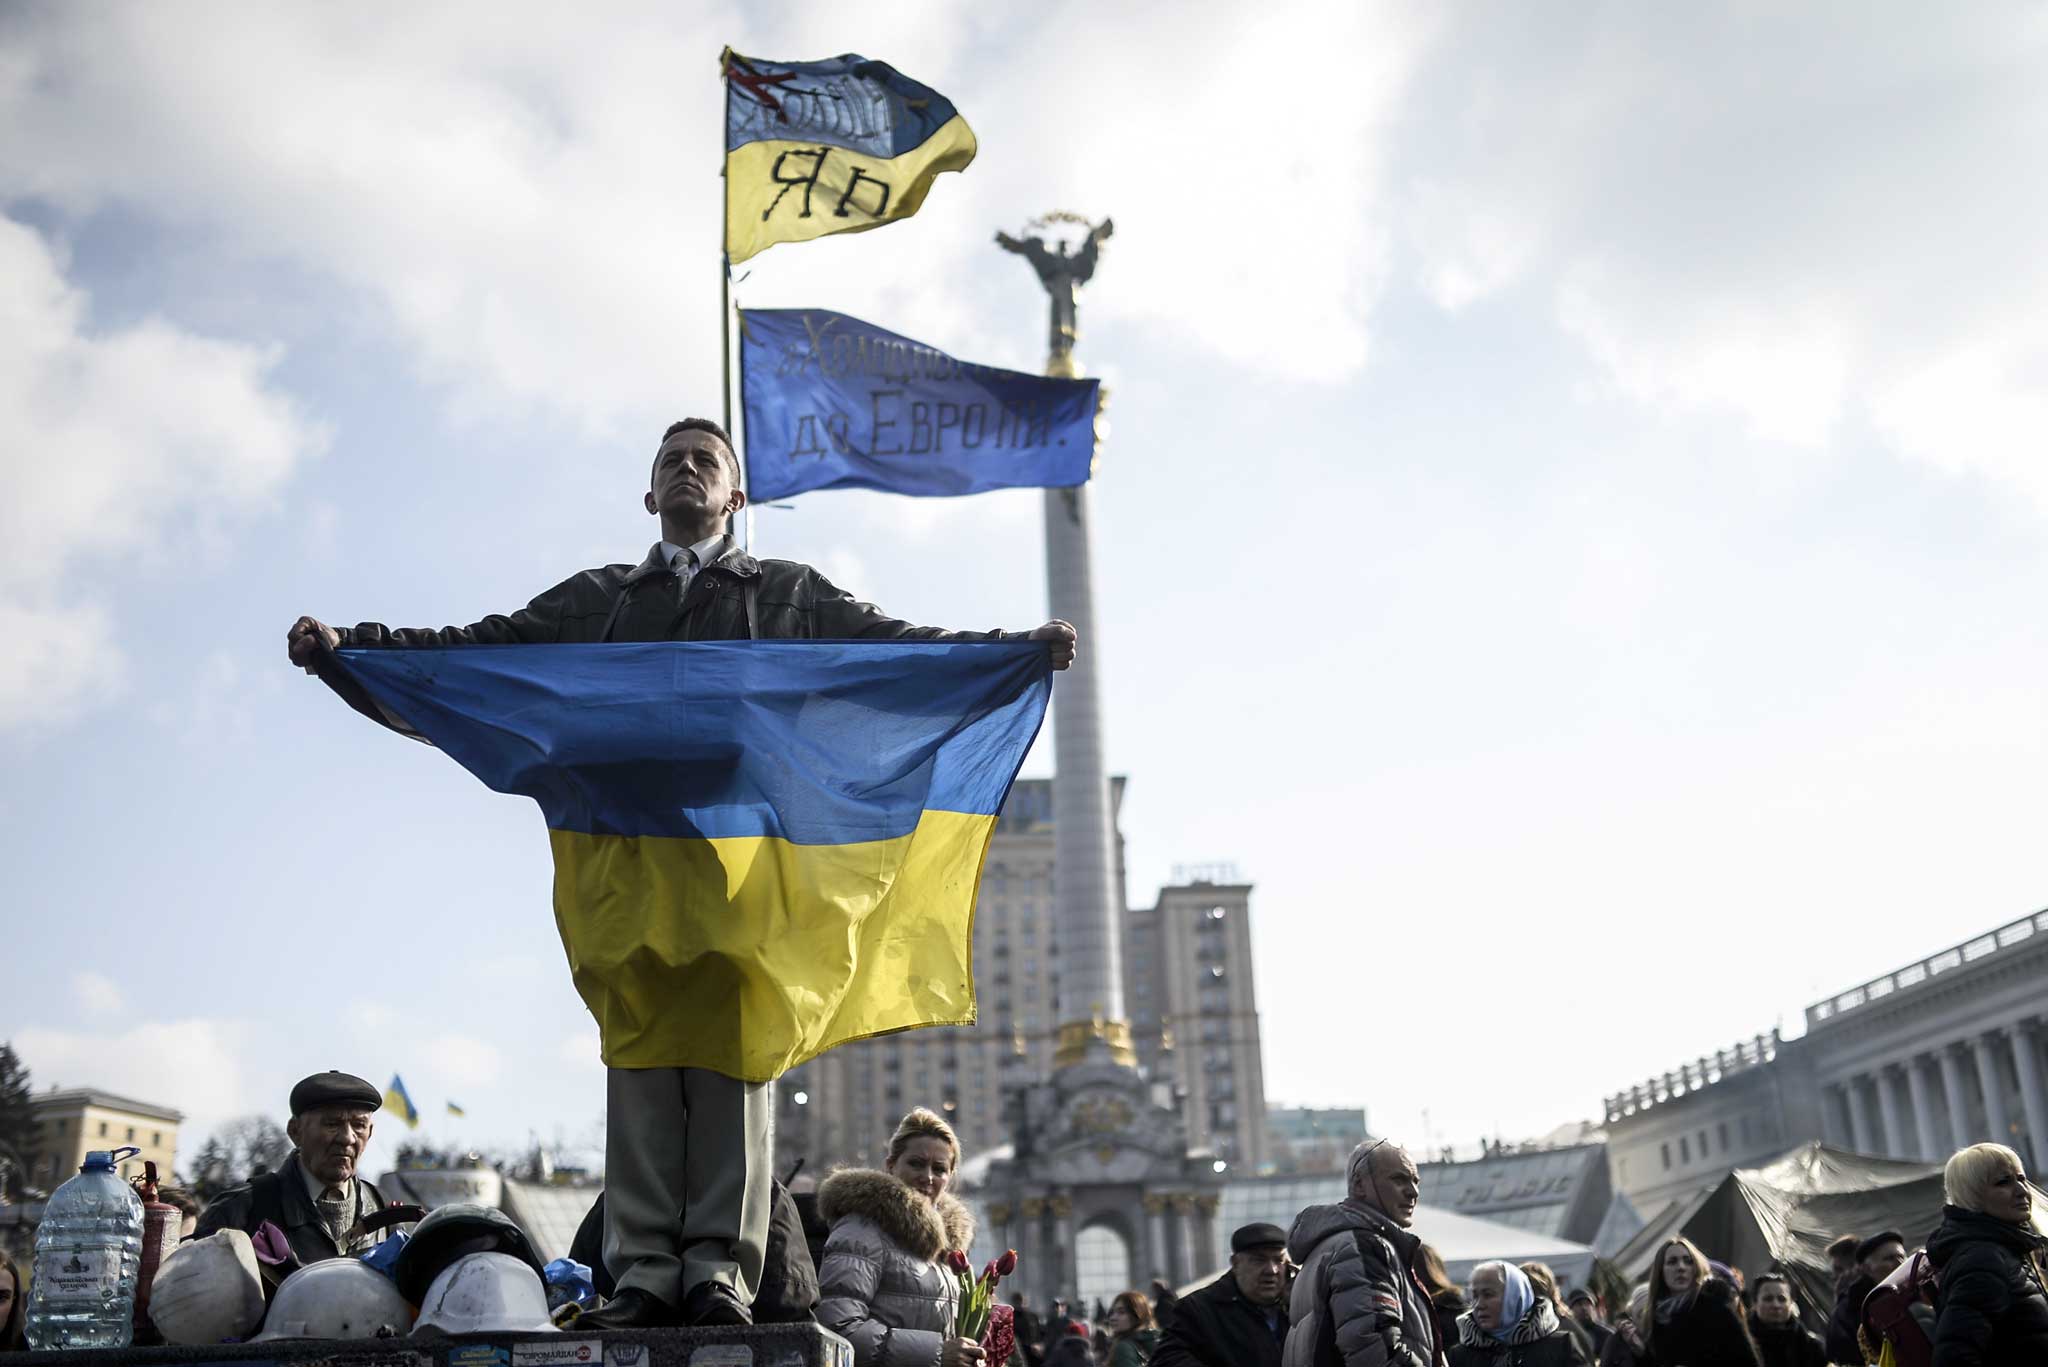 Patriotic fervour: the Maidan protests are the focal point of these diaries